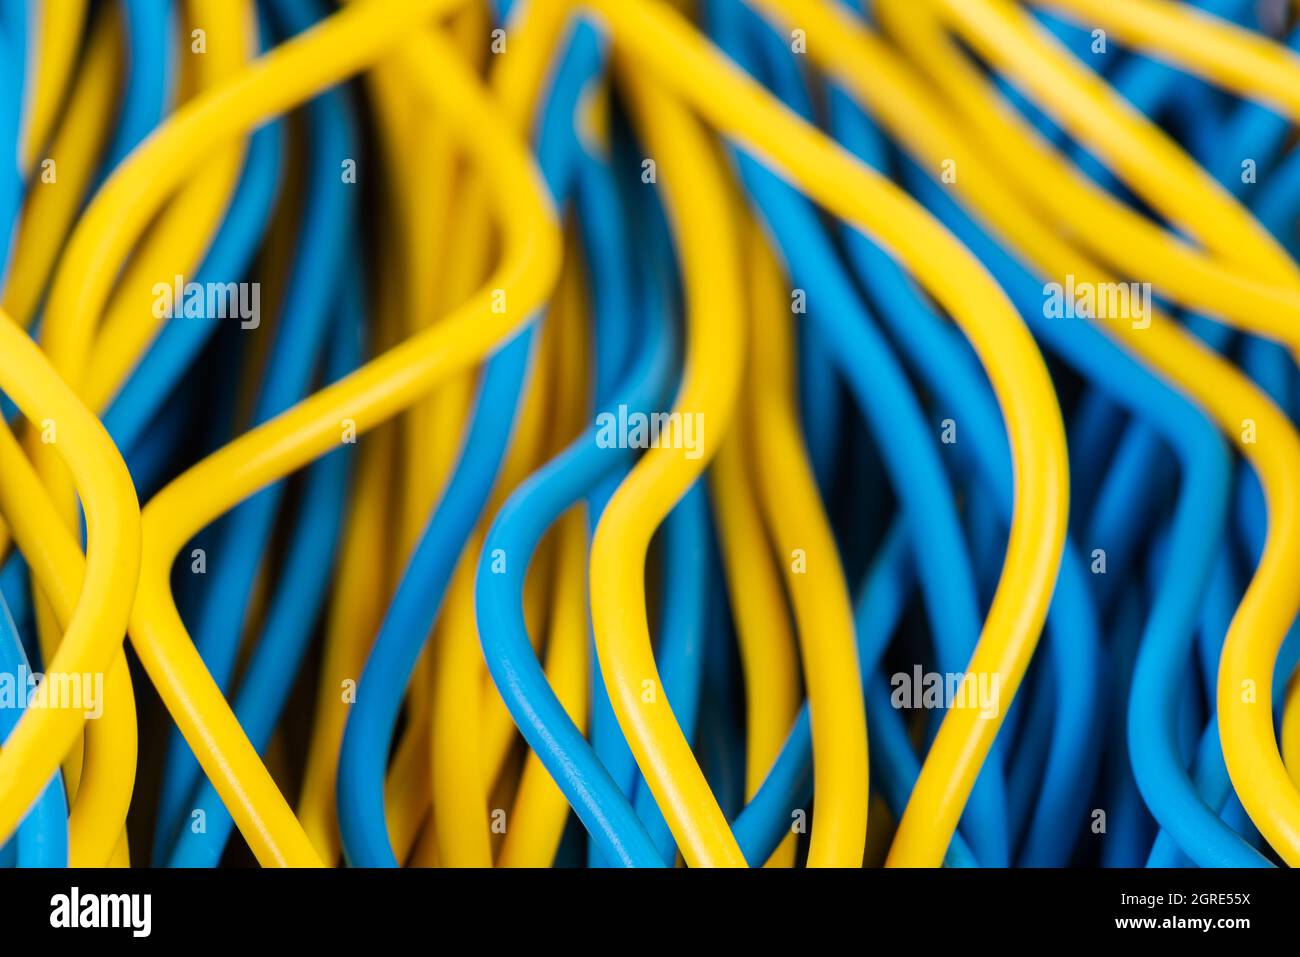 Electrical computer cable cord close-up Stock Photo